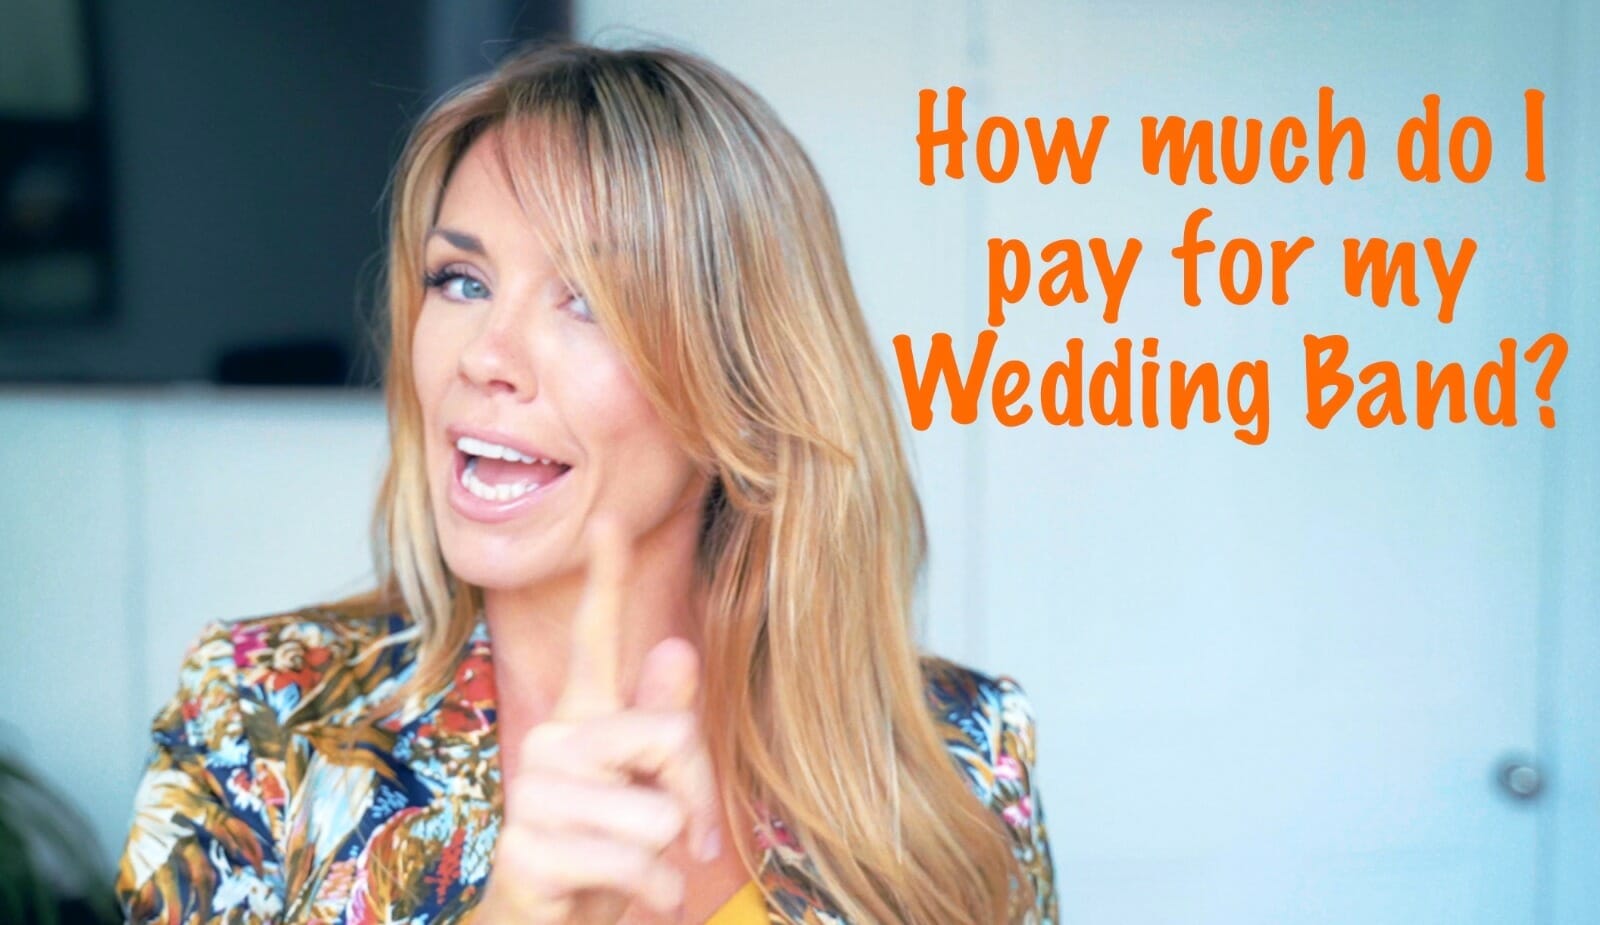 How much does it cost to hire a wedding band?